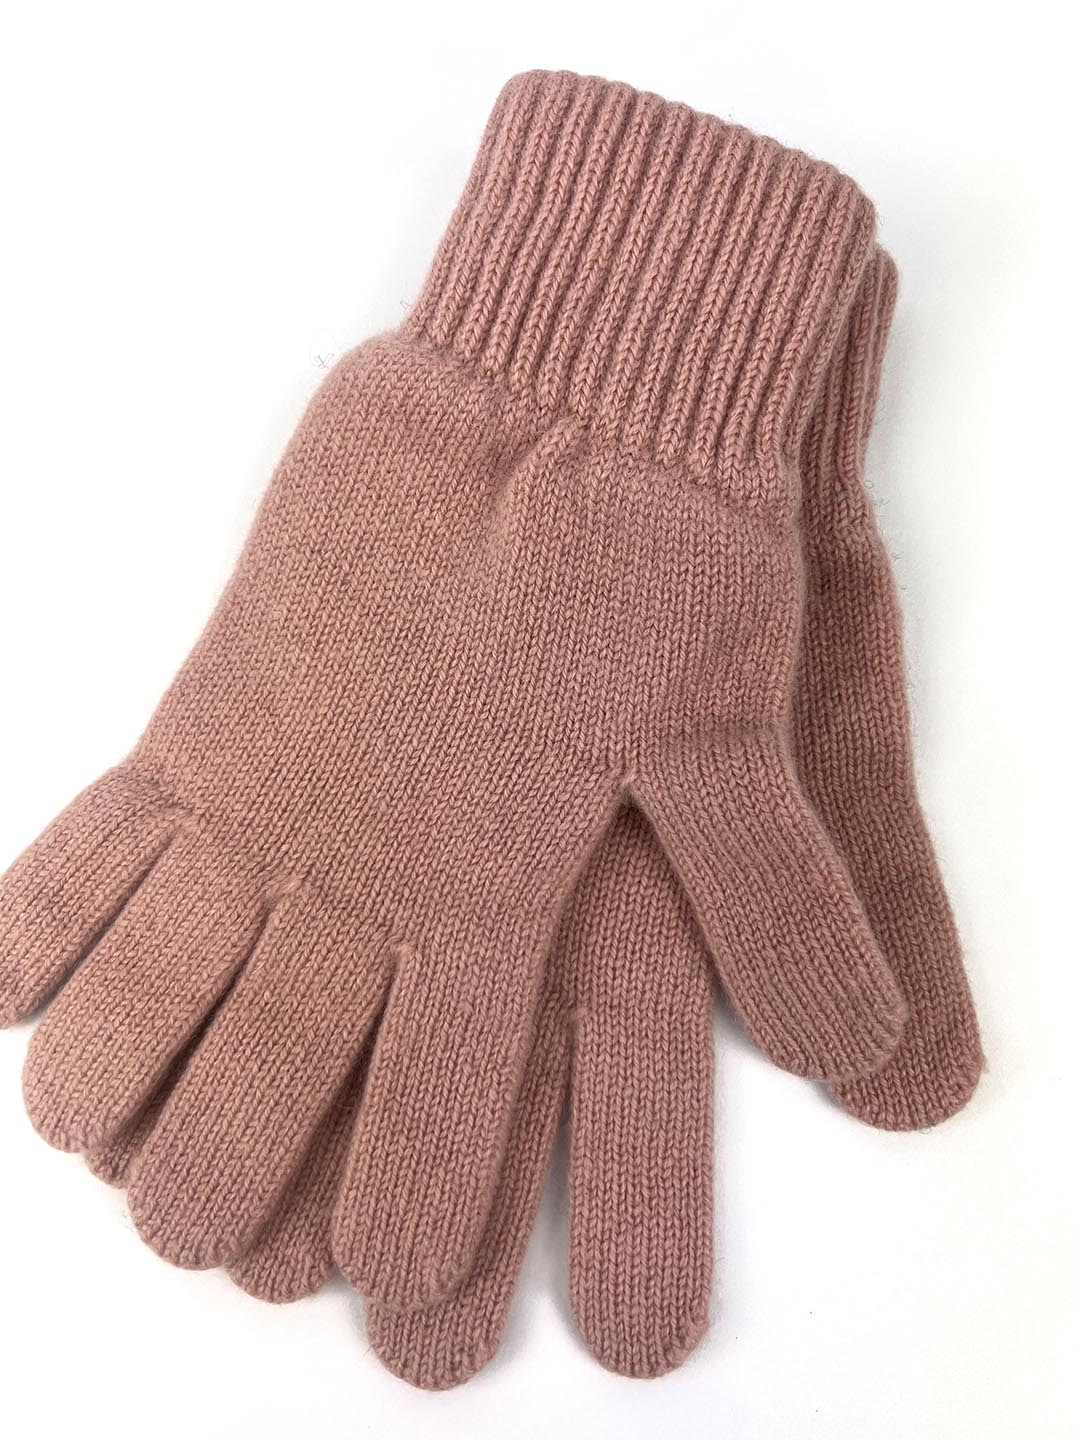 Rosie sugden cashmere gloves in shades of pink. Knitted in the Scottish borders